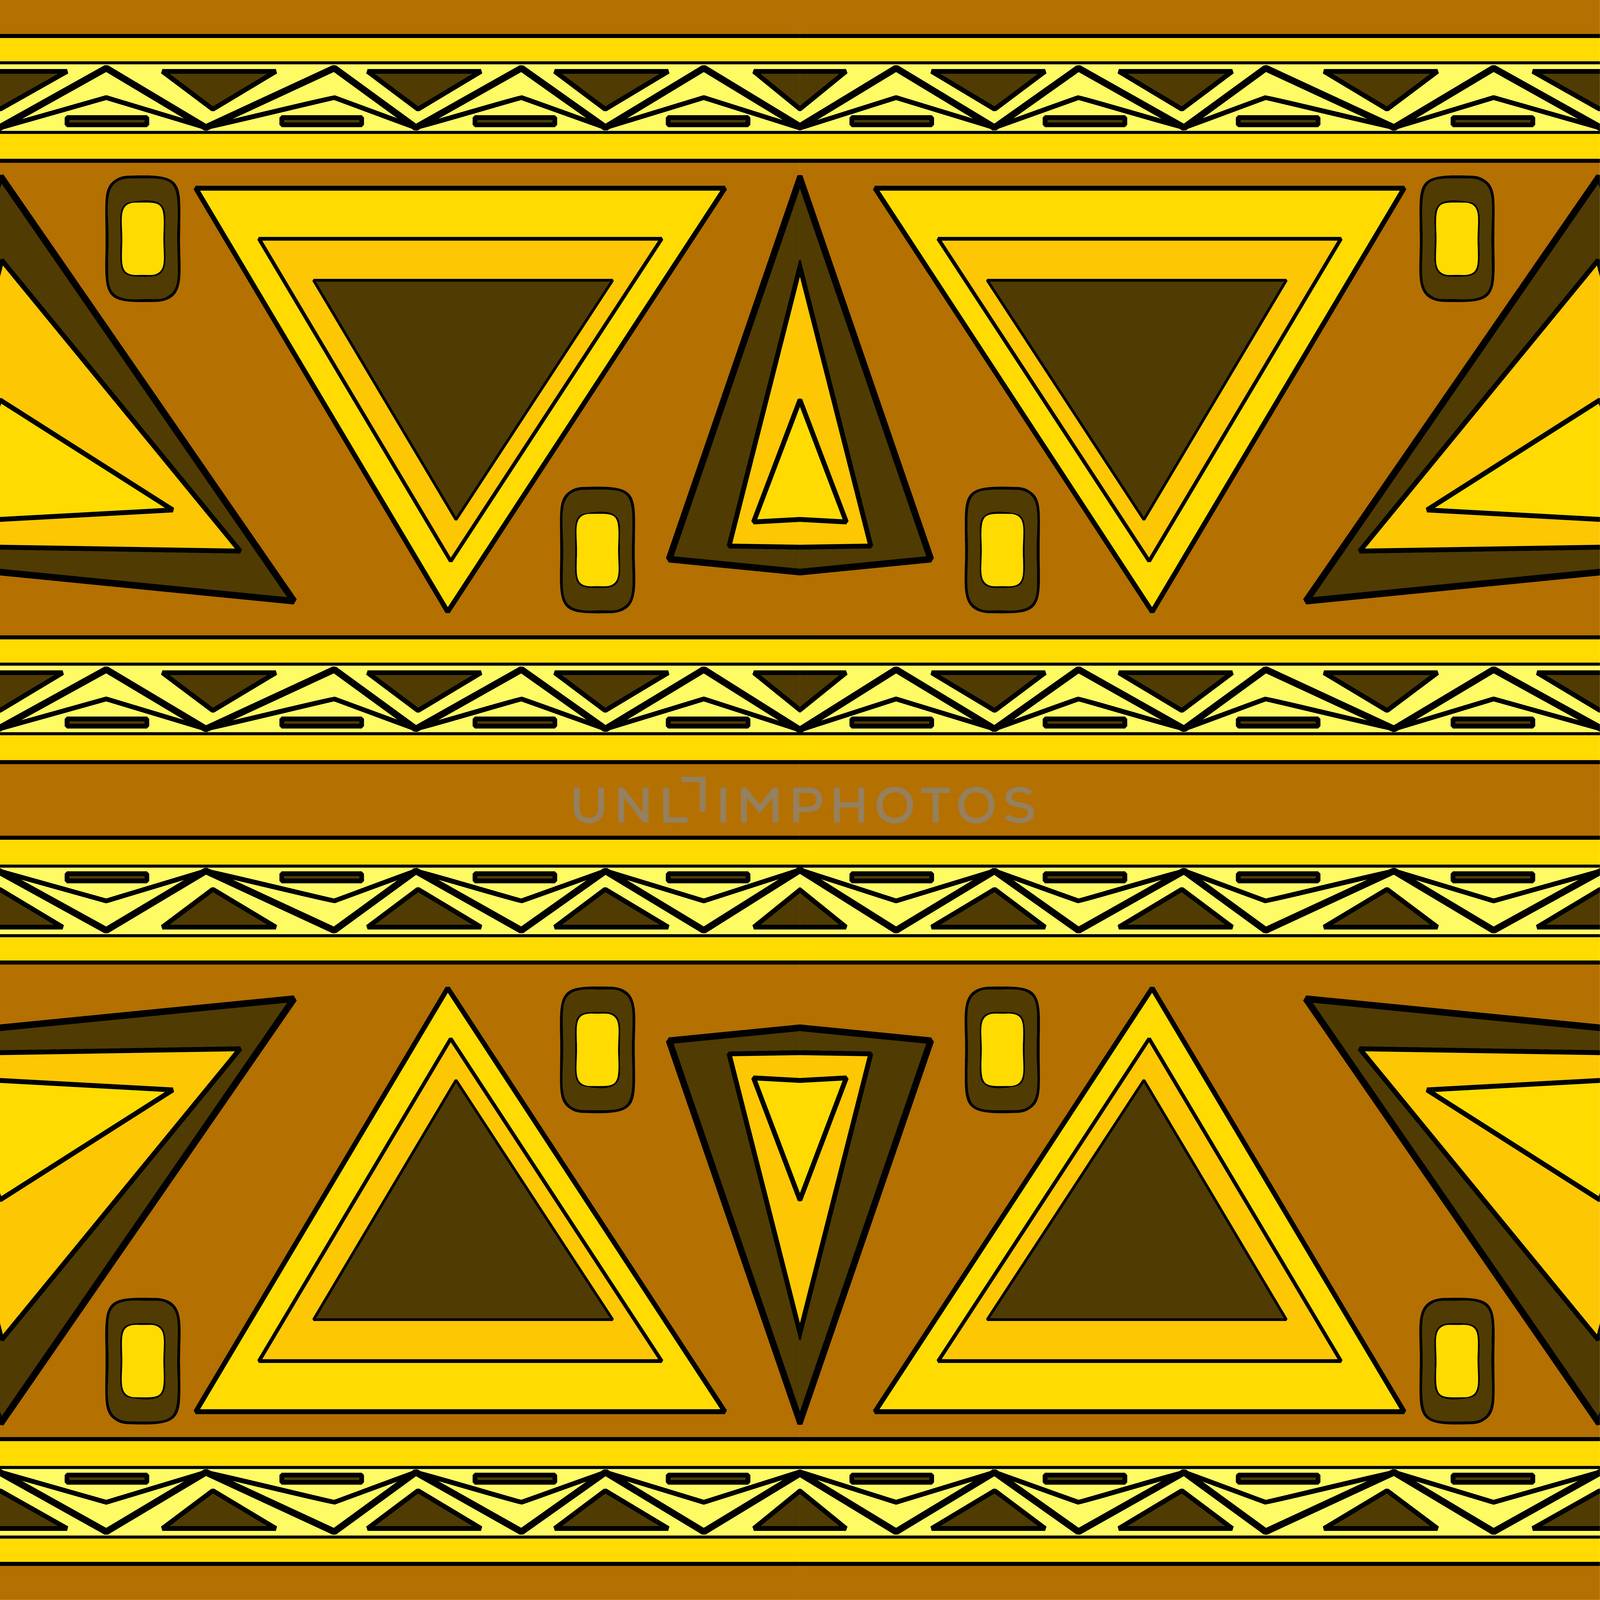 Seamless decorative pattern. ethnic endless background with ornamental decorative elements with traditional etnic motives, tribal geometric figures. Print for wrapping, background